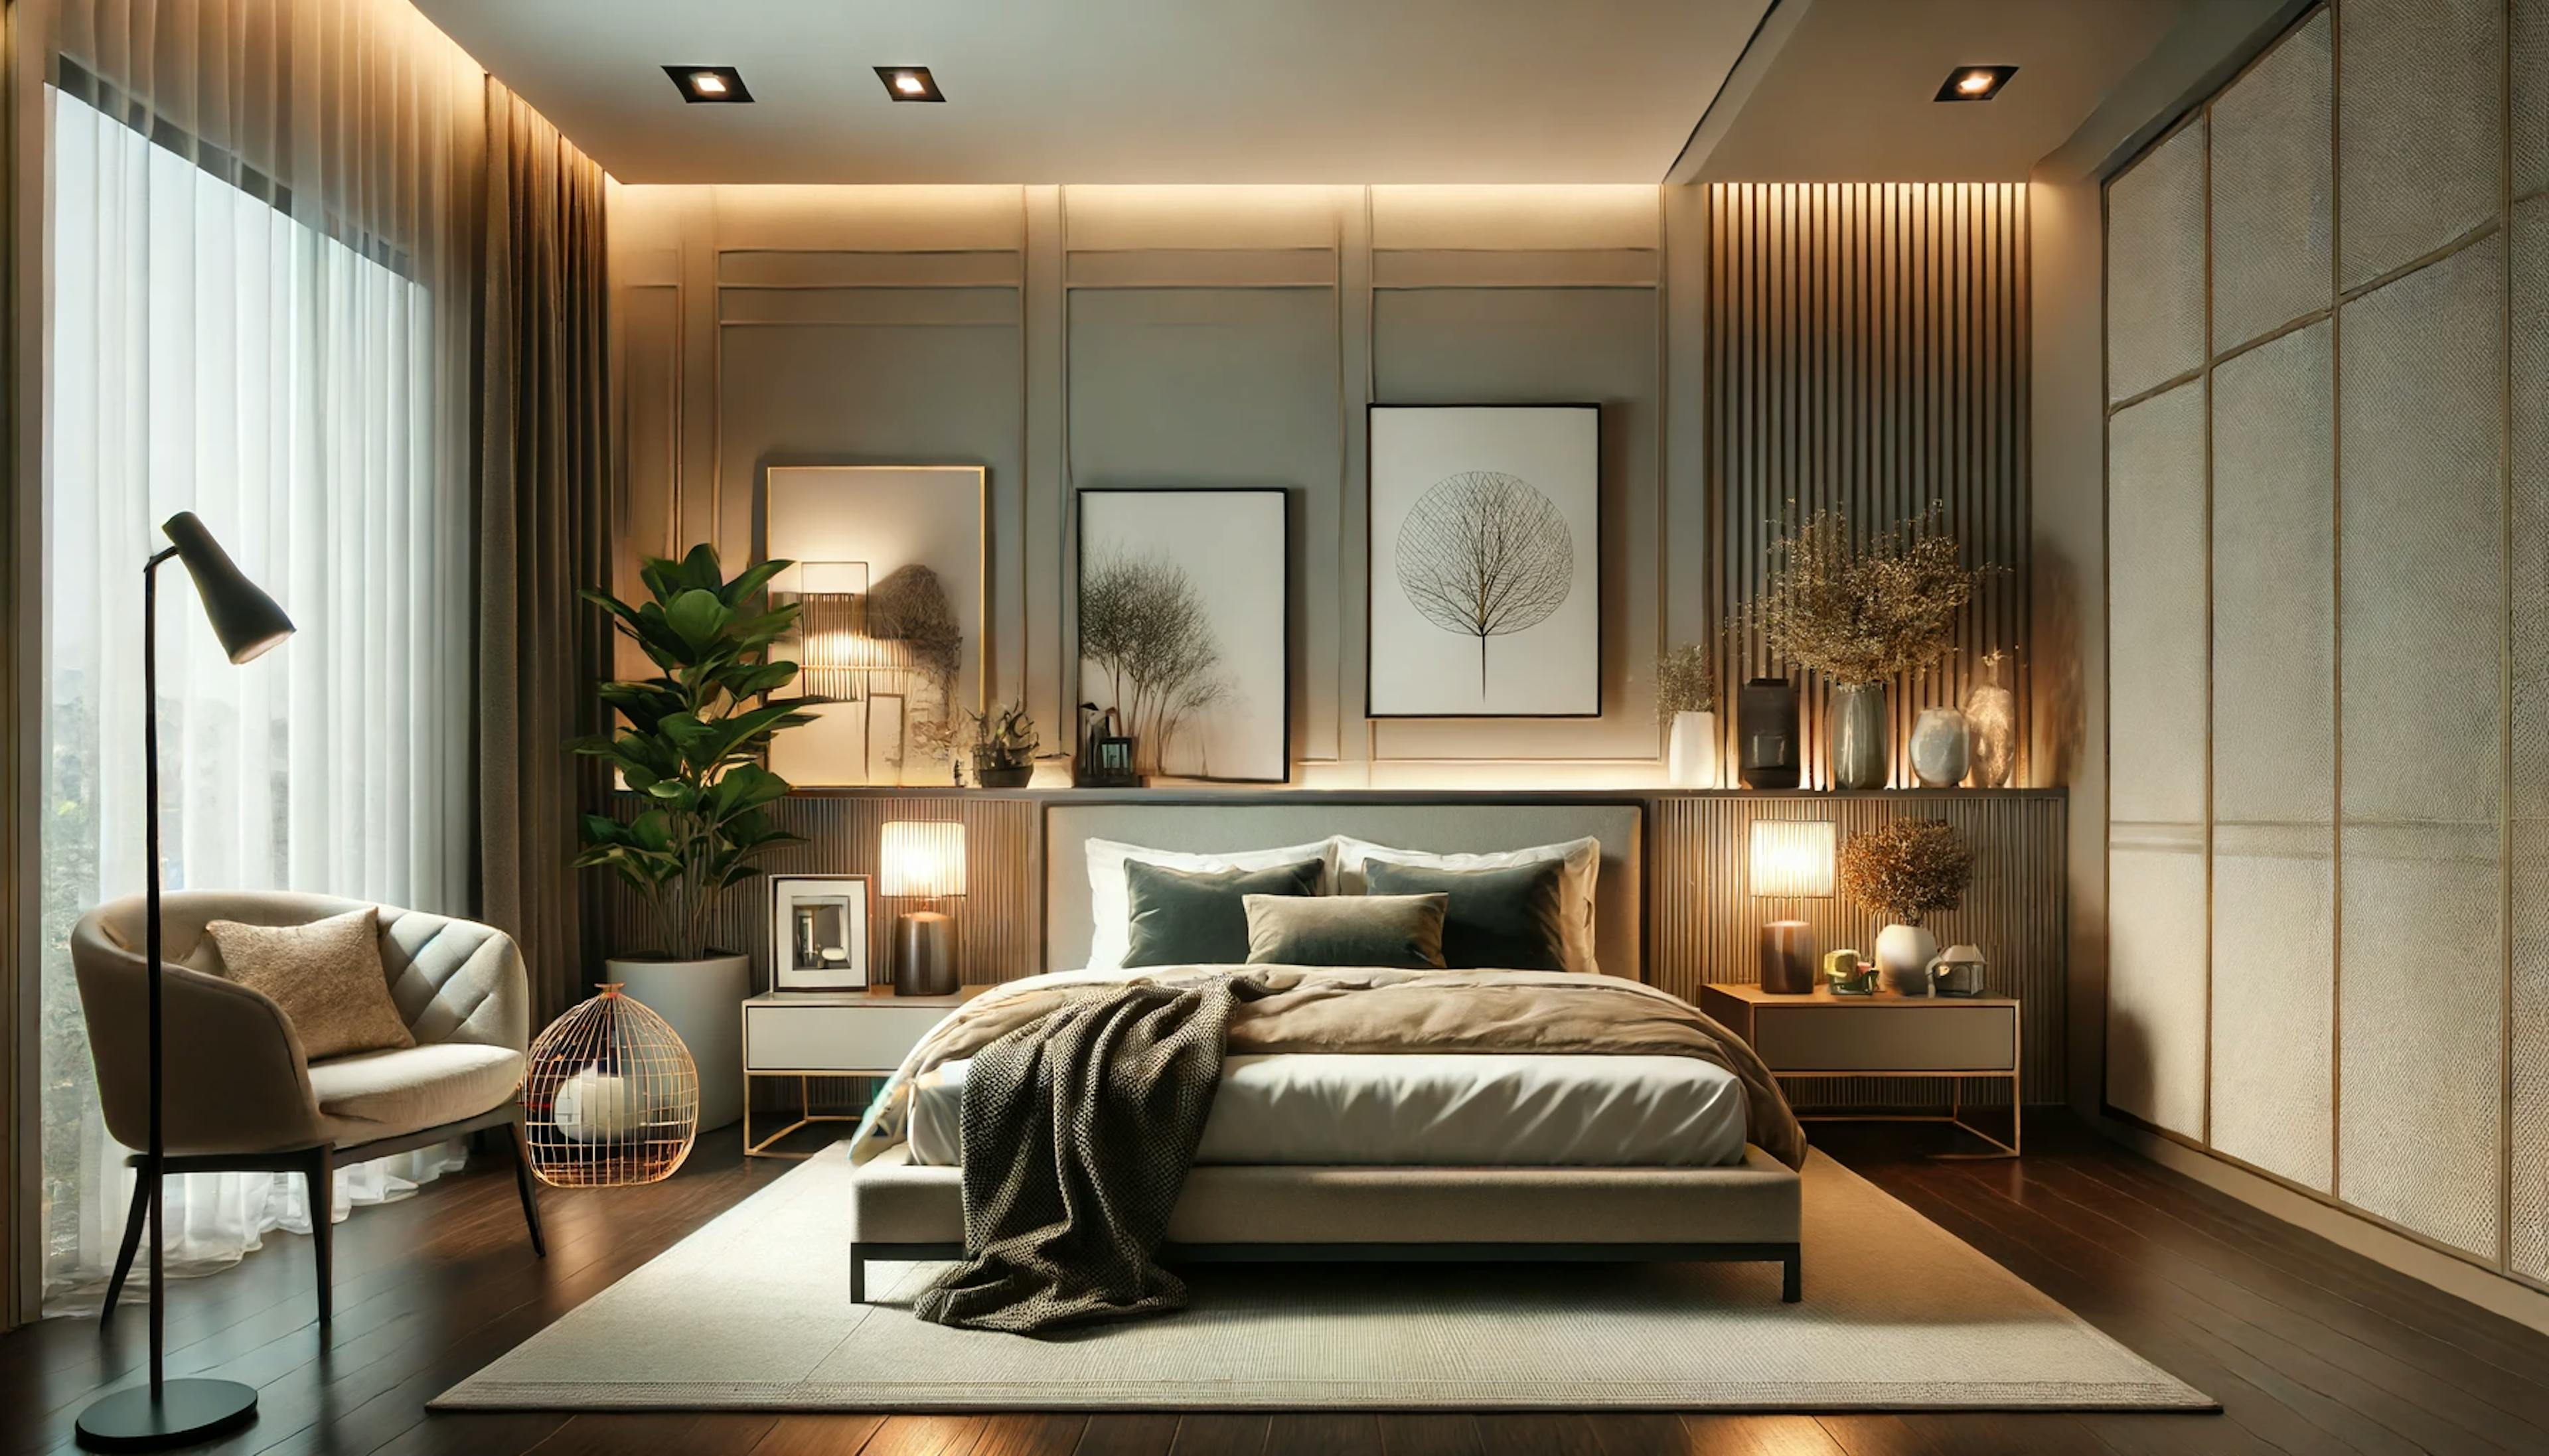 Modern bedroom with a blend of stylish and budget-friendly furniture